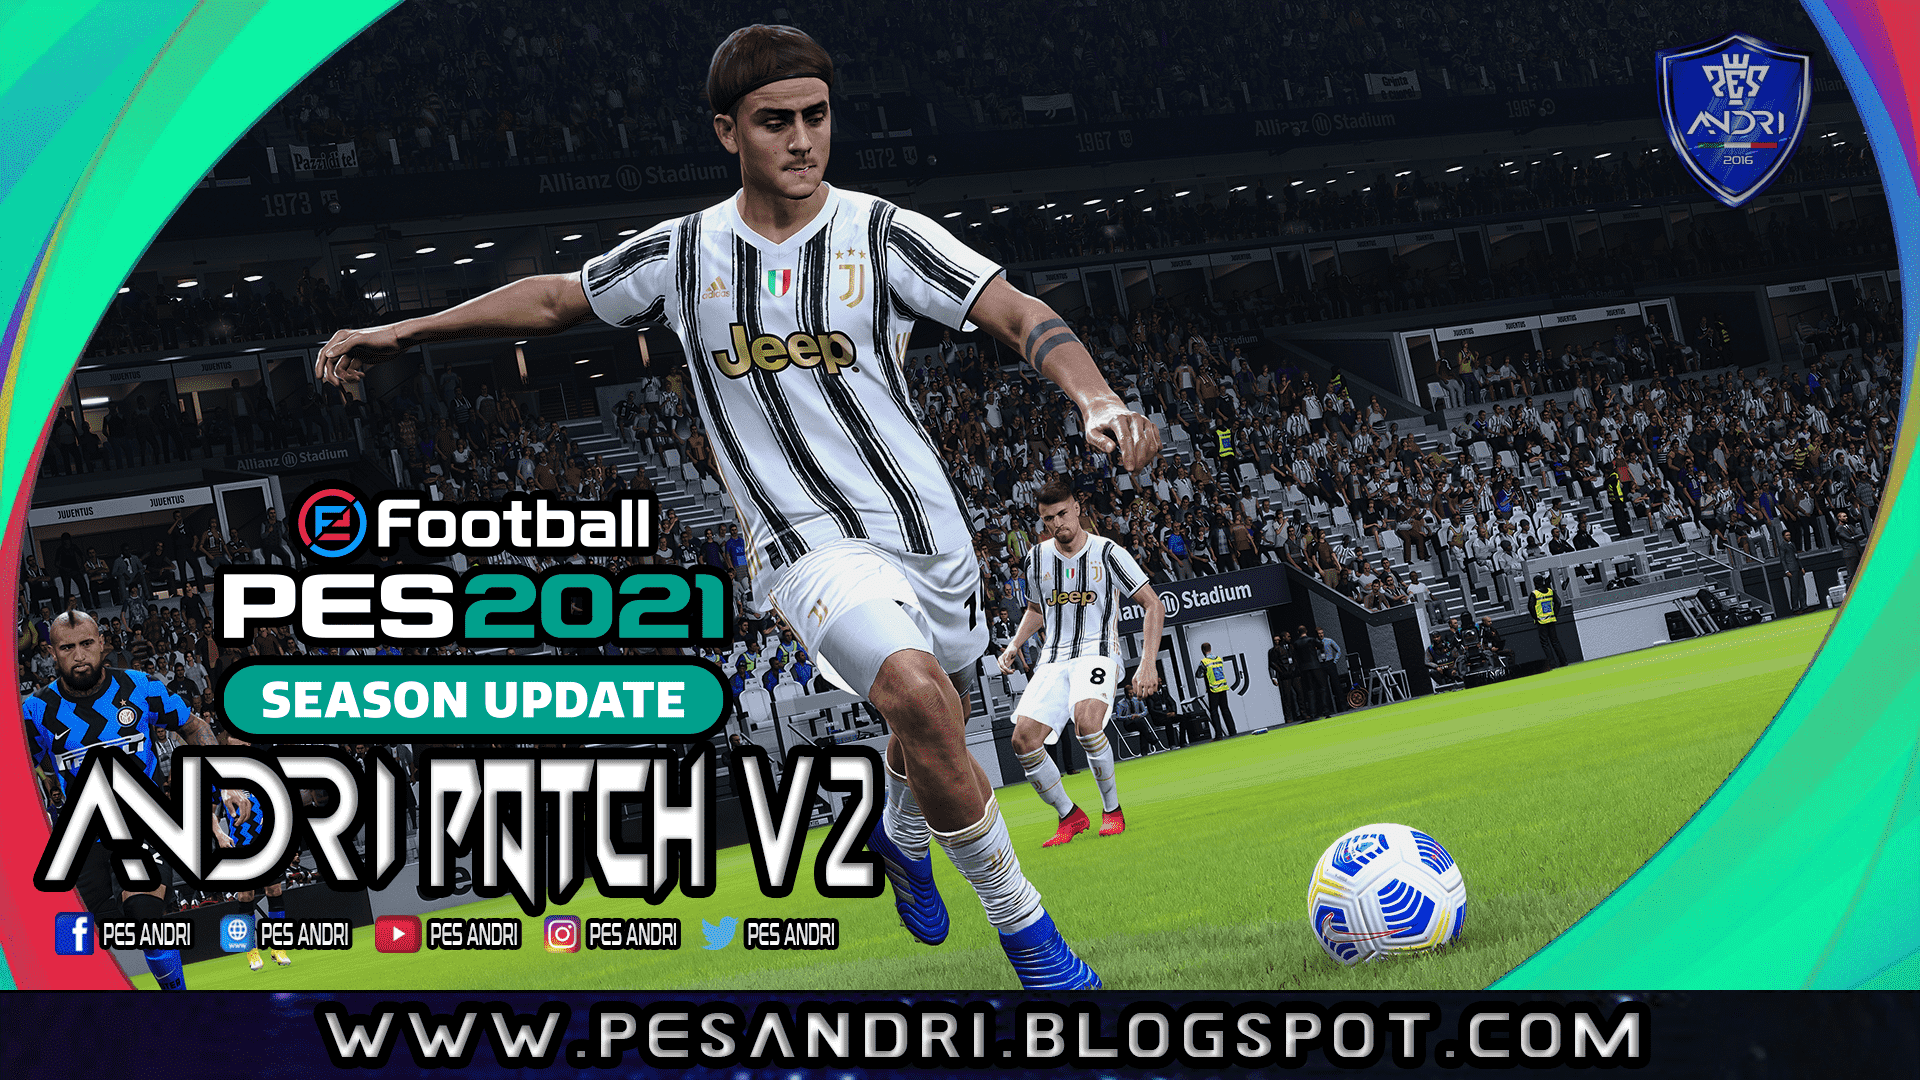 efootball pes 2021 data pack 4.0 download pc